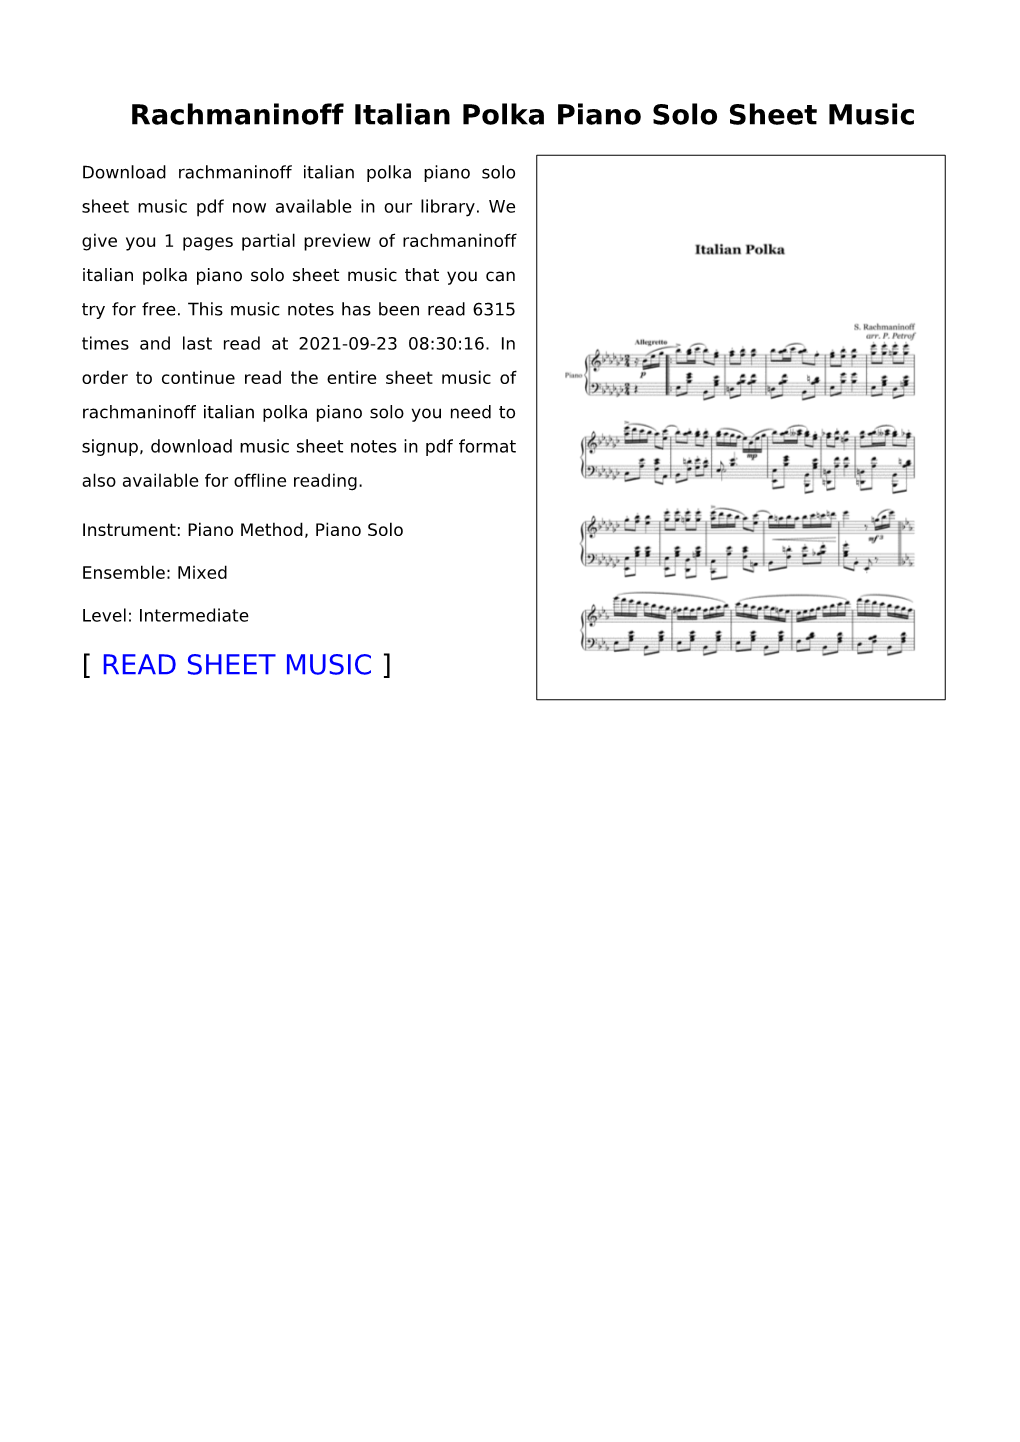 Sheet Music of Rachmaninoff Italian Polka Piano Solo You Need to Signup, Download Music Sheet Notes in Pdf Format Also Available for Offline Reading